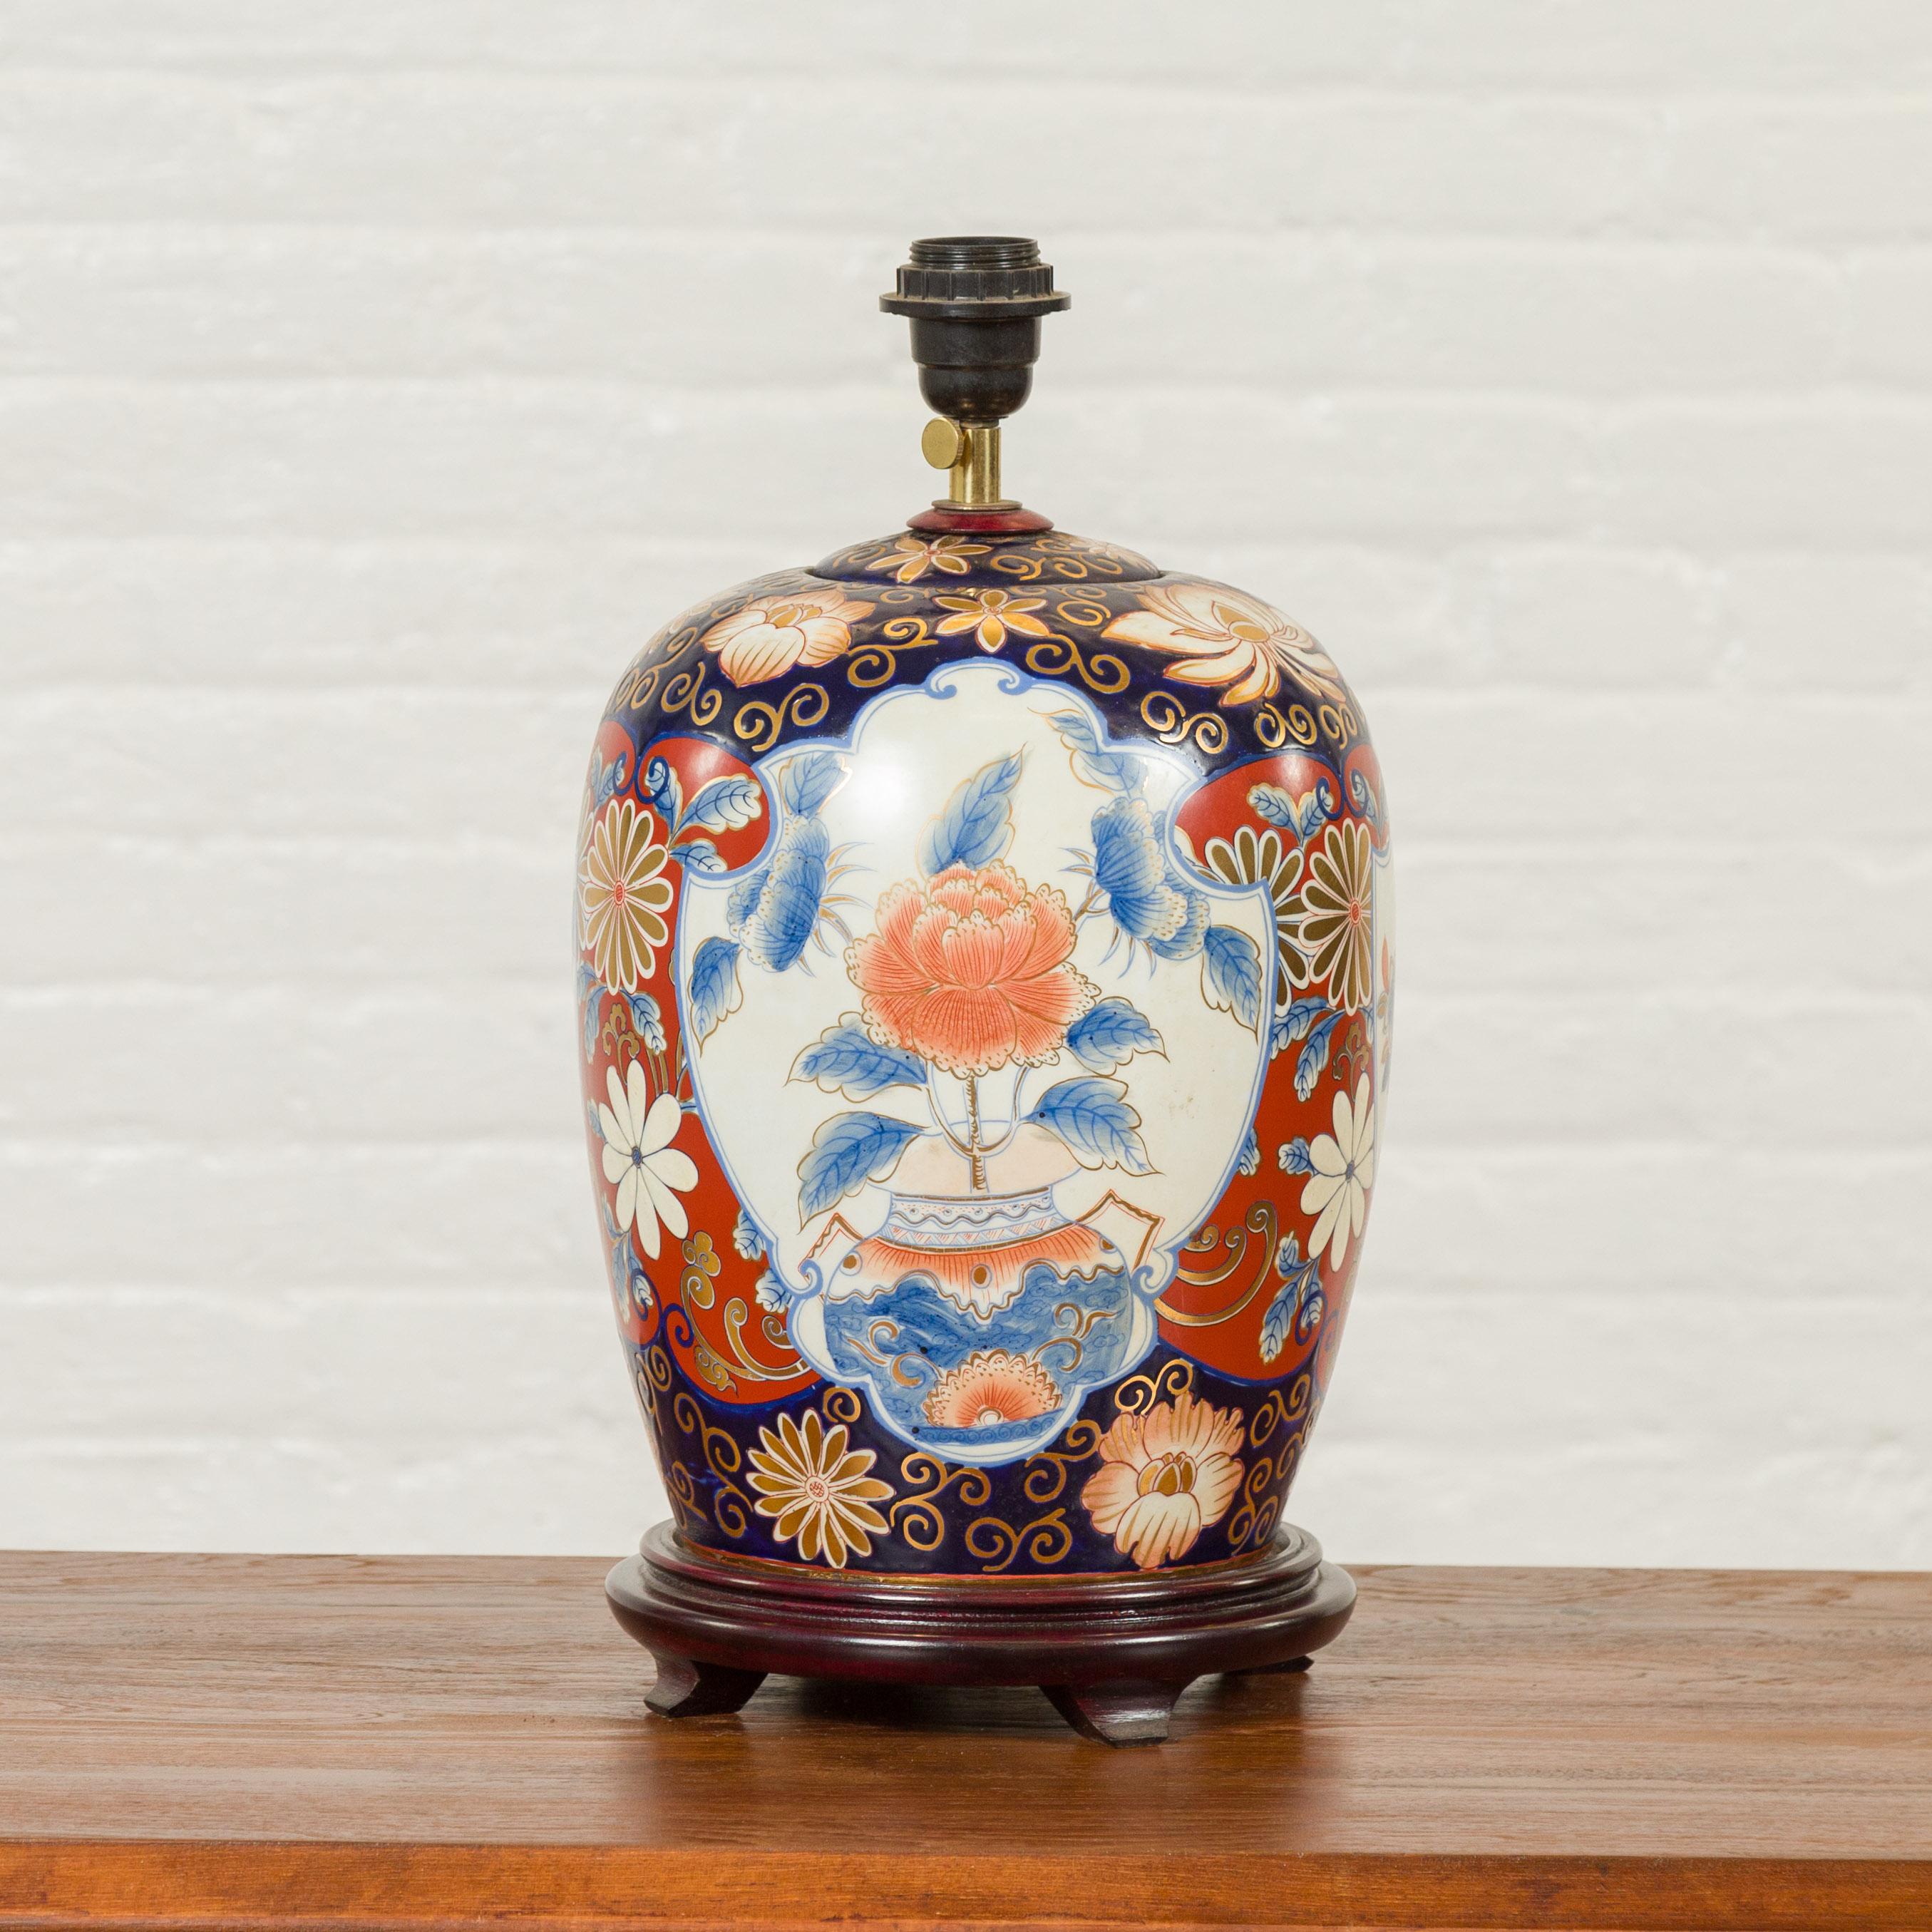 A Japanese Imari ceramic table lamp from the 20th century mounted on a custom base. Created in Japan during the 20th century, this table lamp features a midnight blue, red and golden decor accented with white cartouches highlighting the presence of